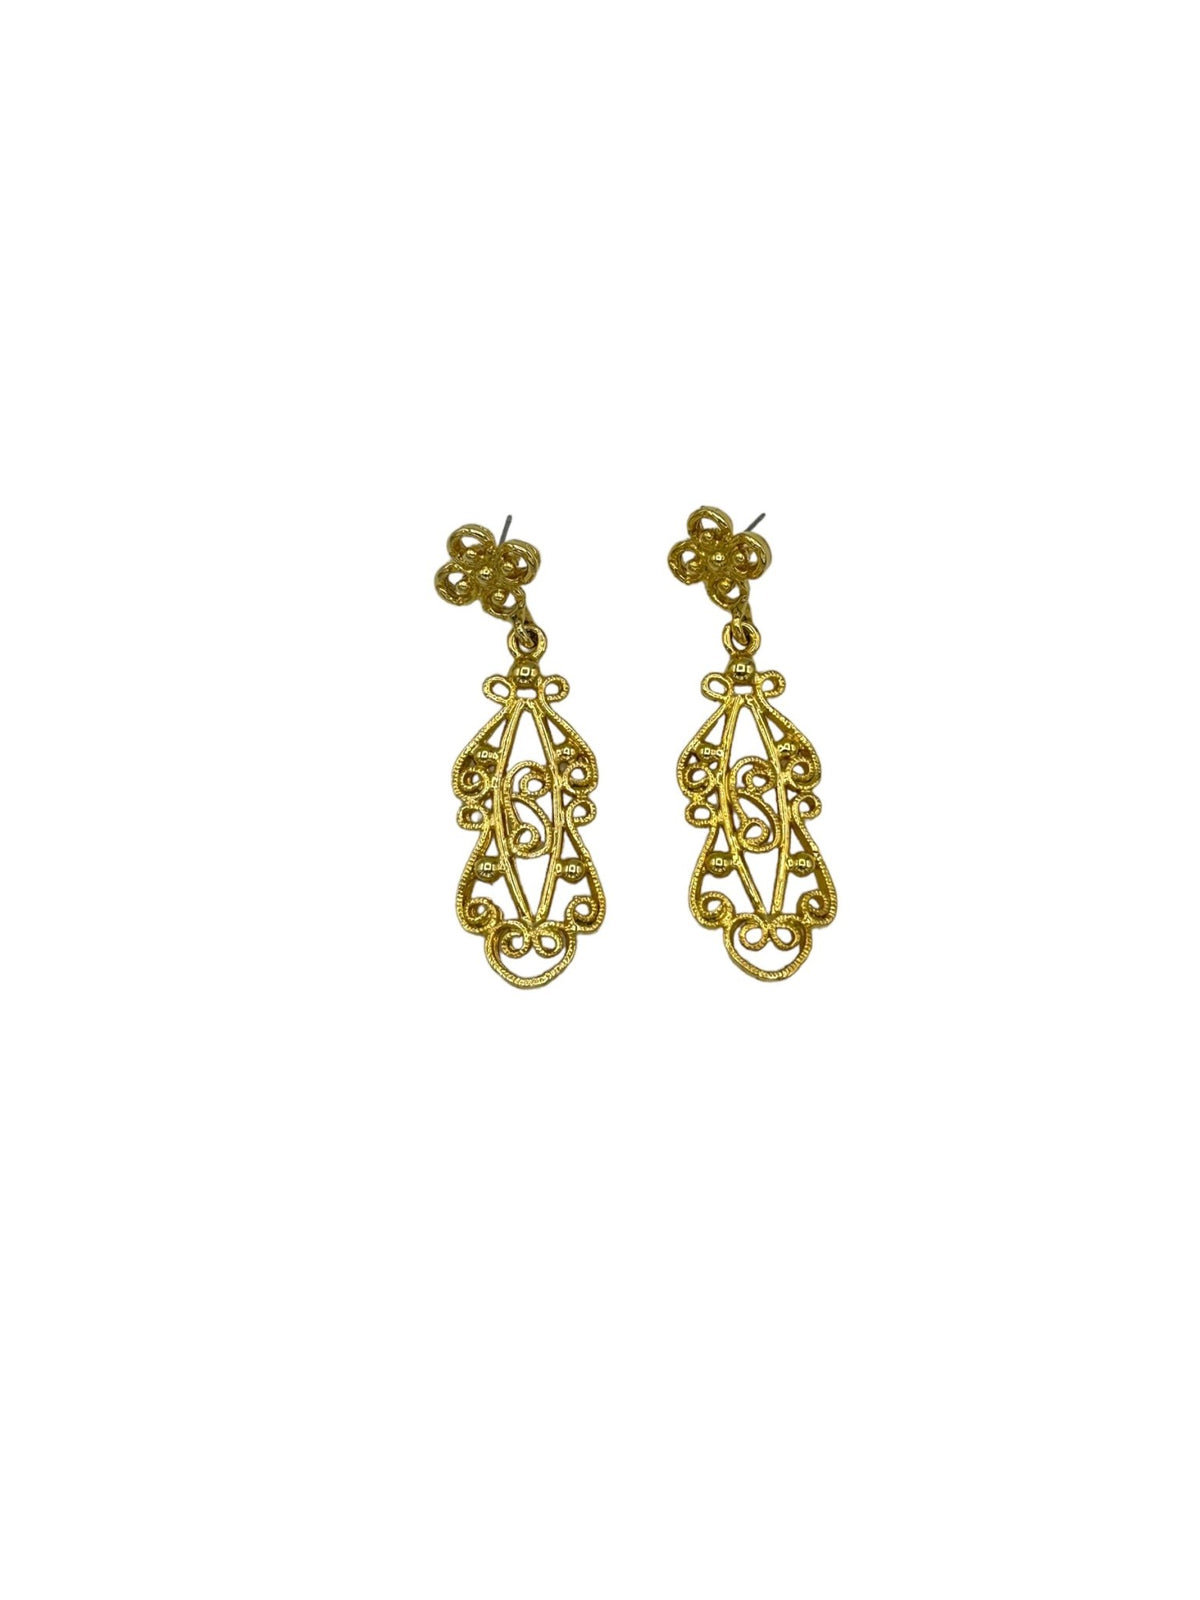 Gold Victorian Revival Filigree Dangle Vintage Pierced Earrings - 24 Wishes Vintage Jewelry